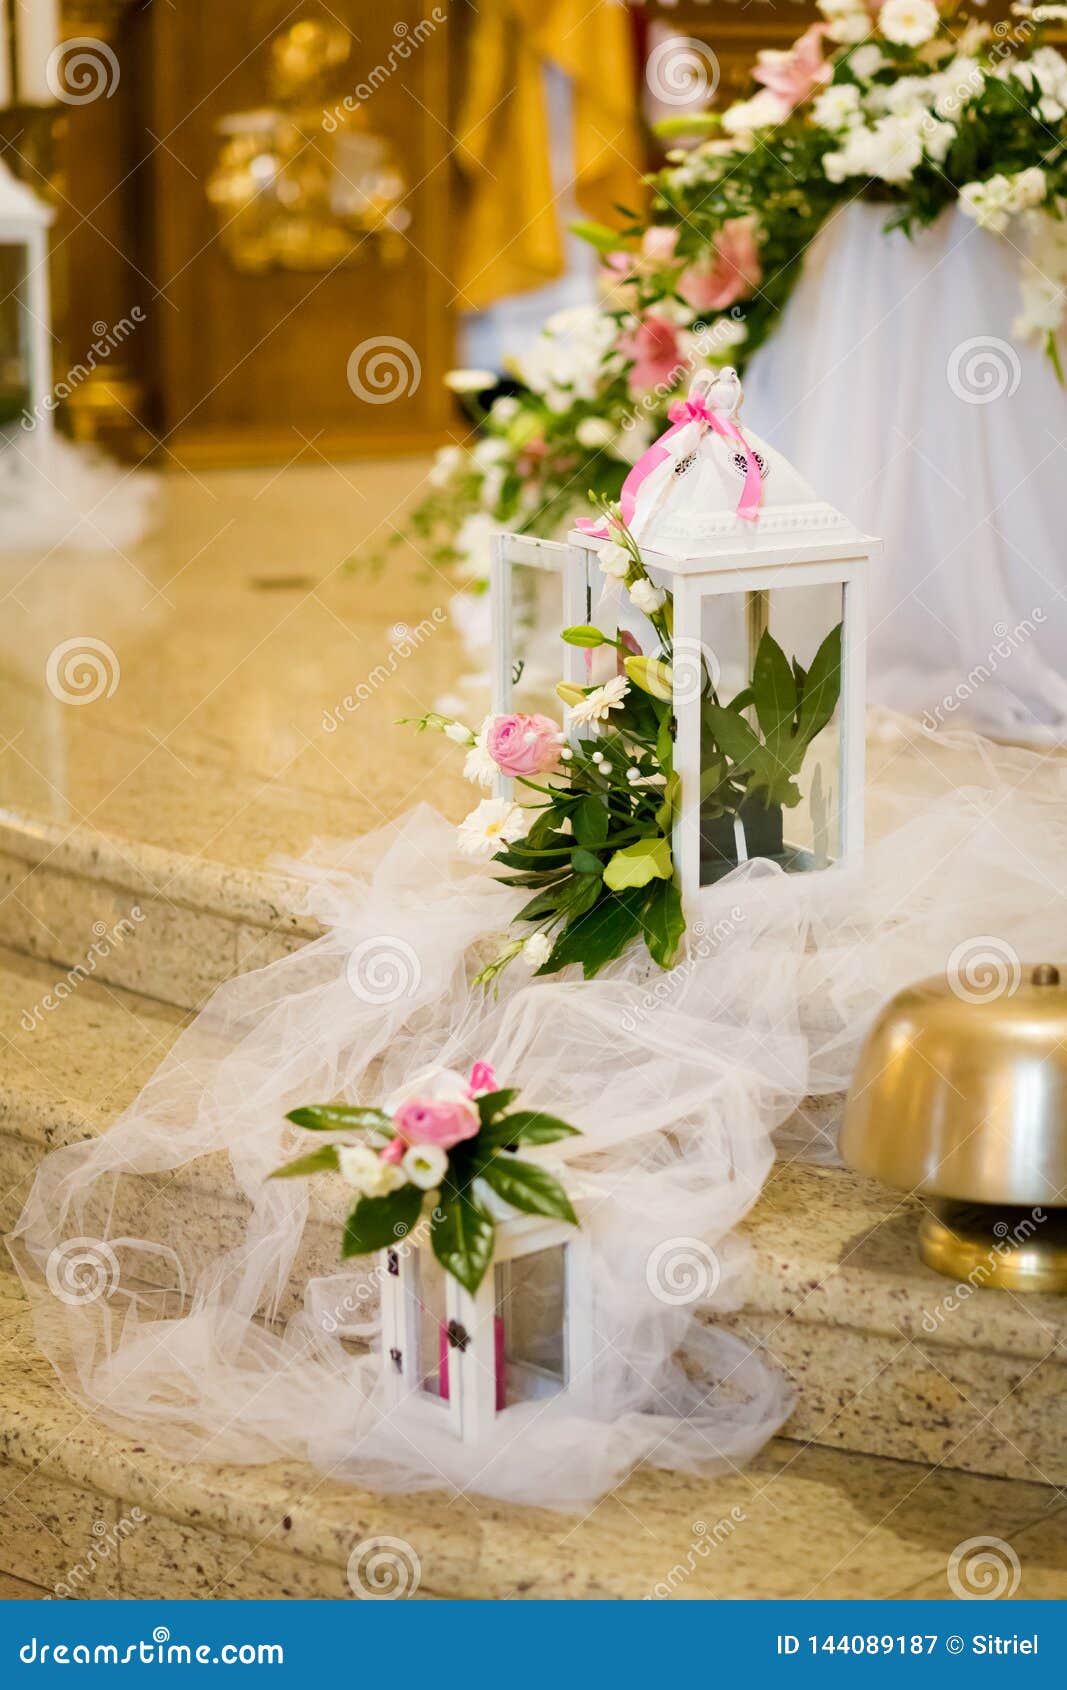 Beautiful Church Decorated For Wedding Ceremony Stock Image